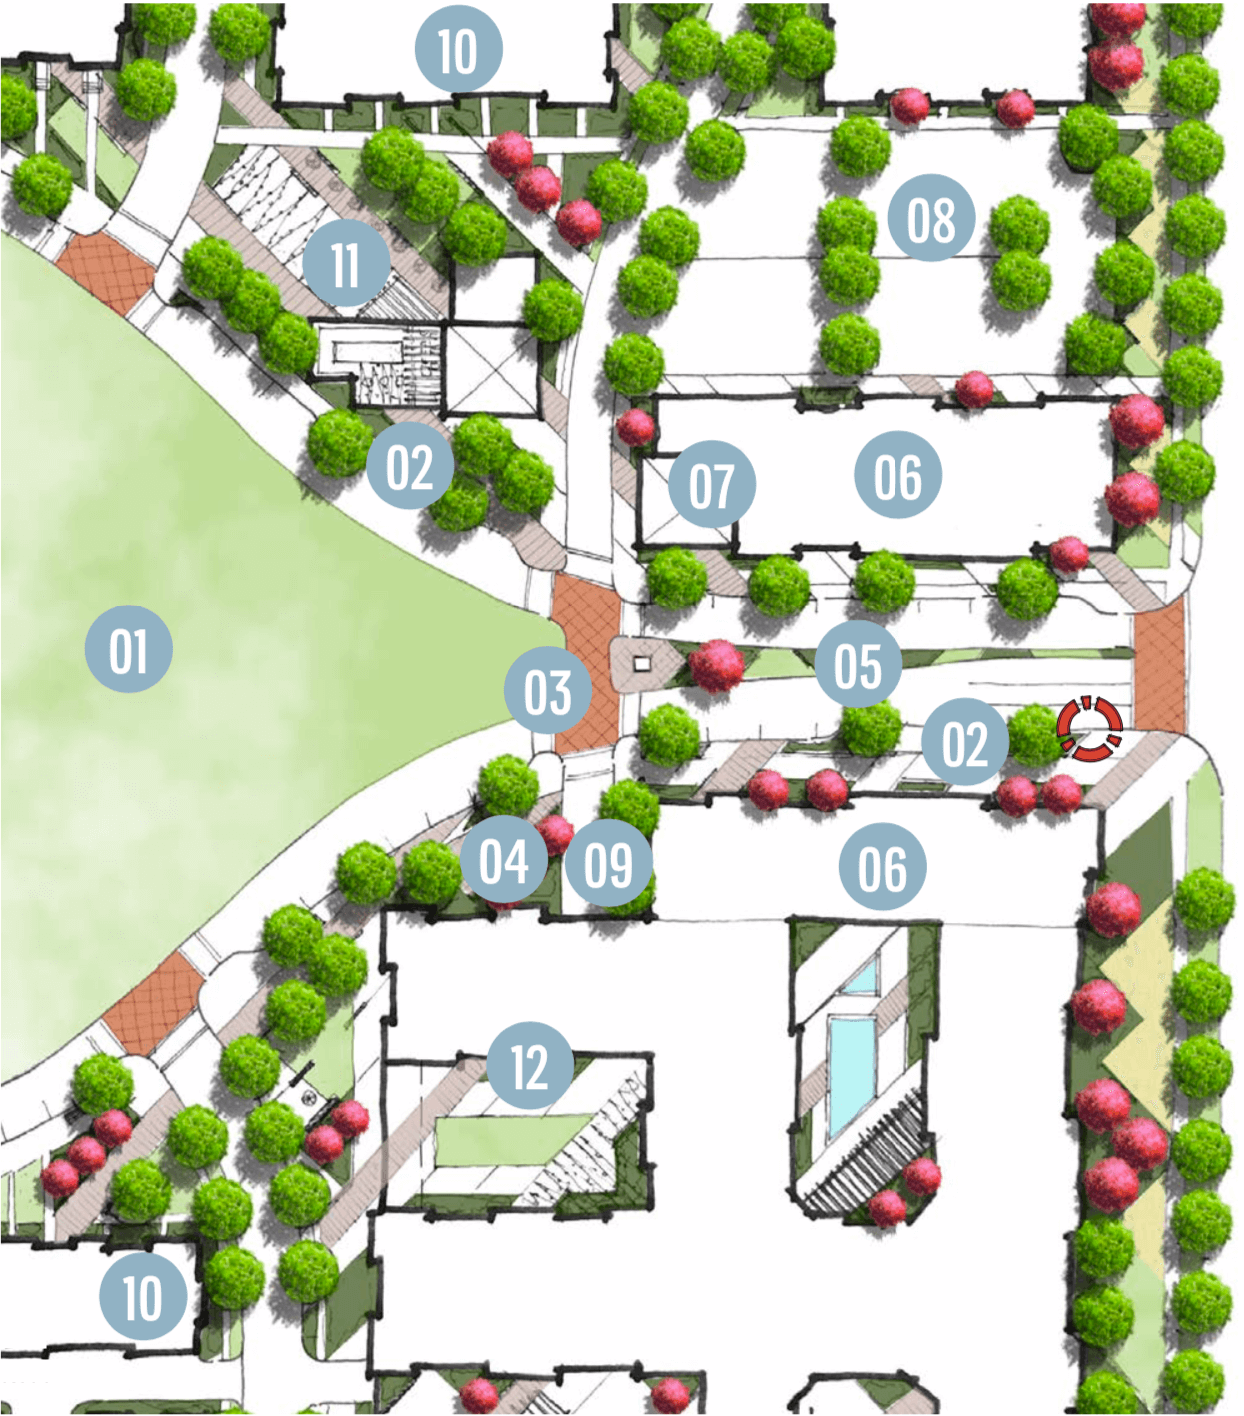 drawing of village center layout